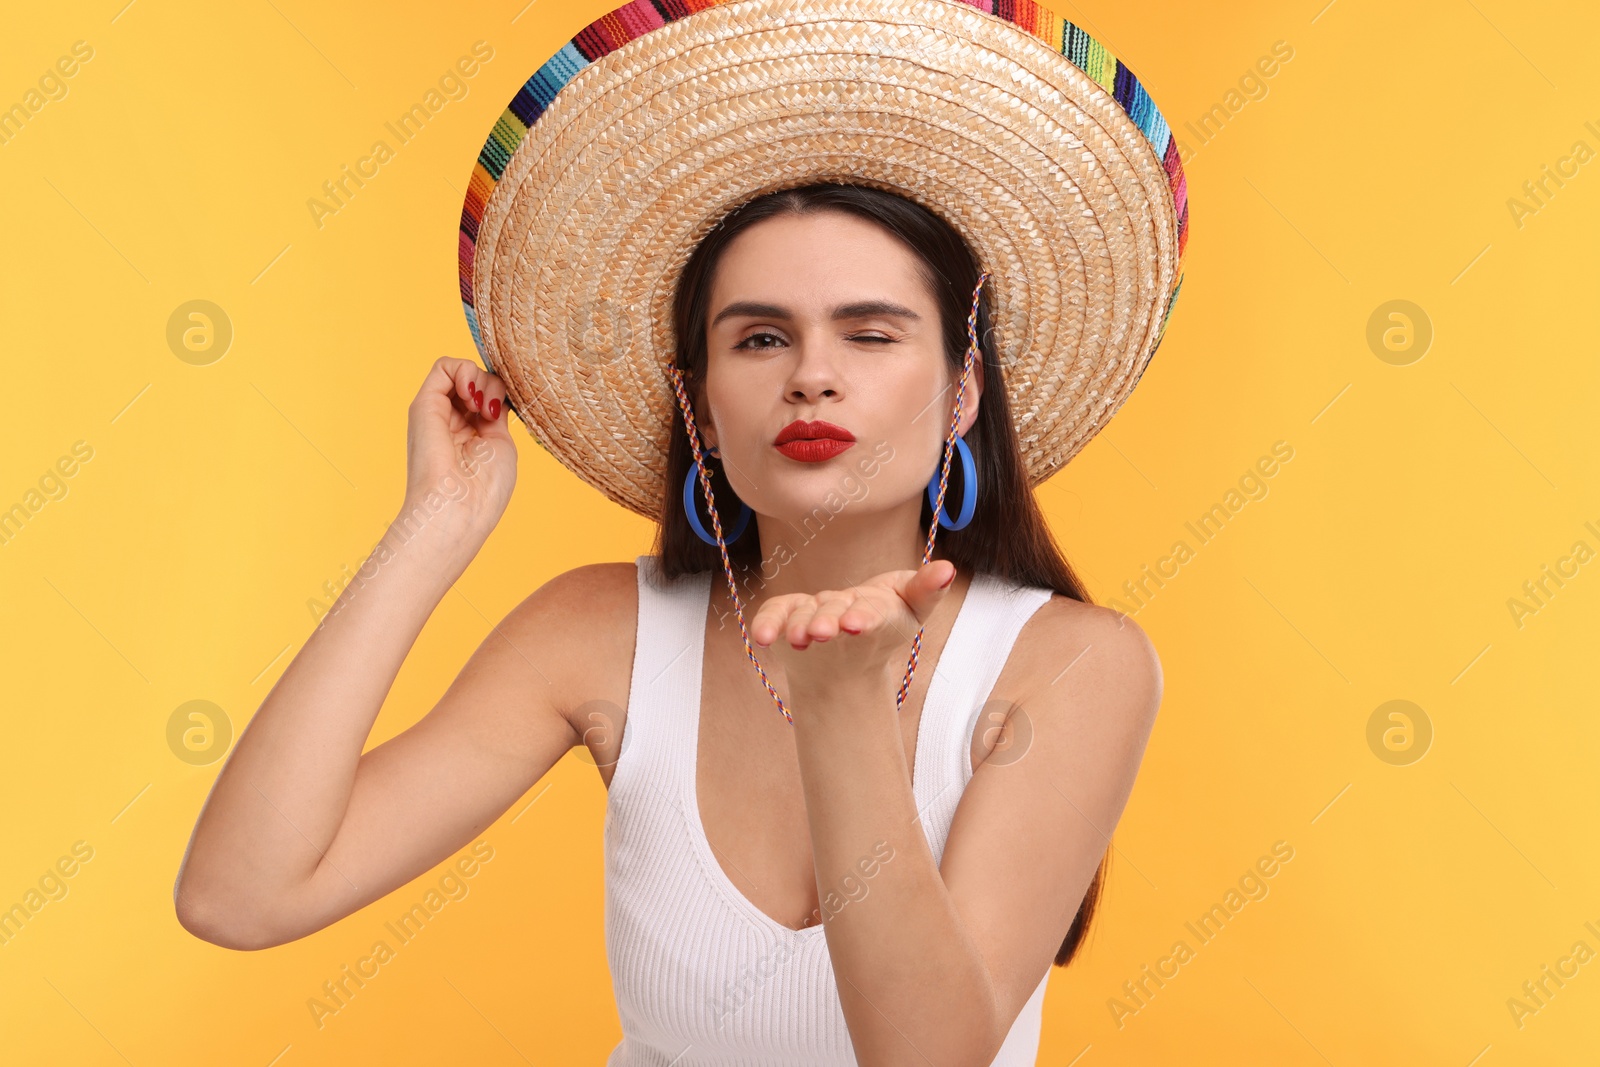 Photo of Young woman in Mexican sombrero hat blowing kiss on yellow background